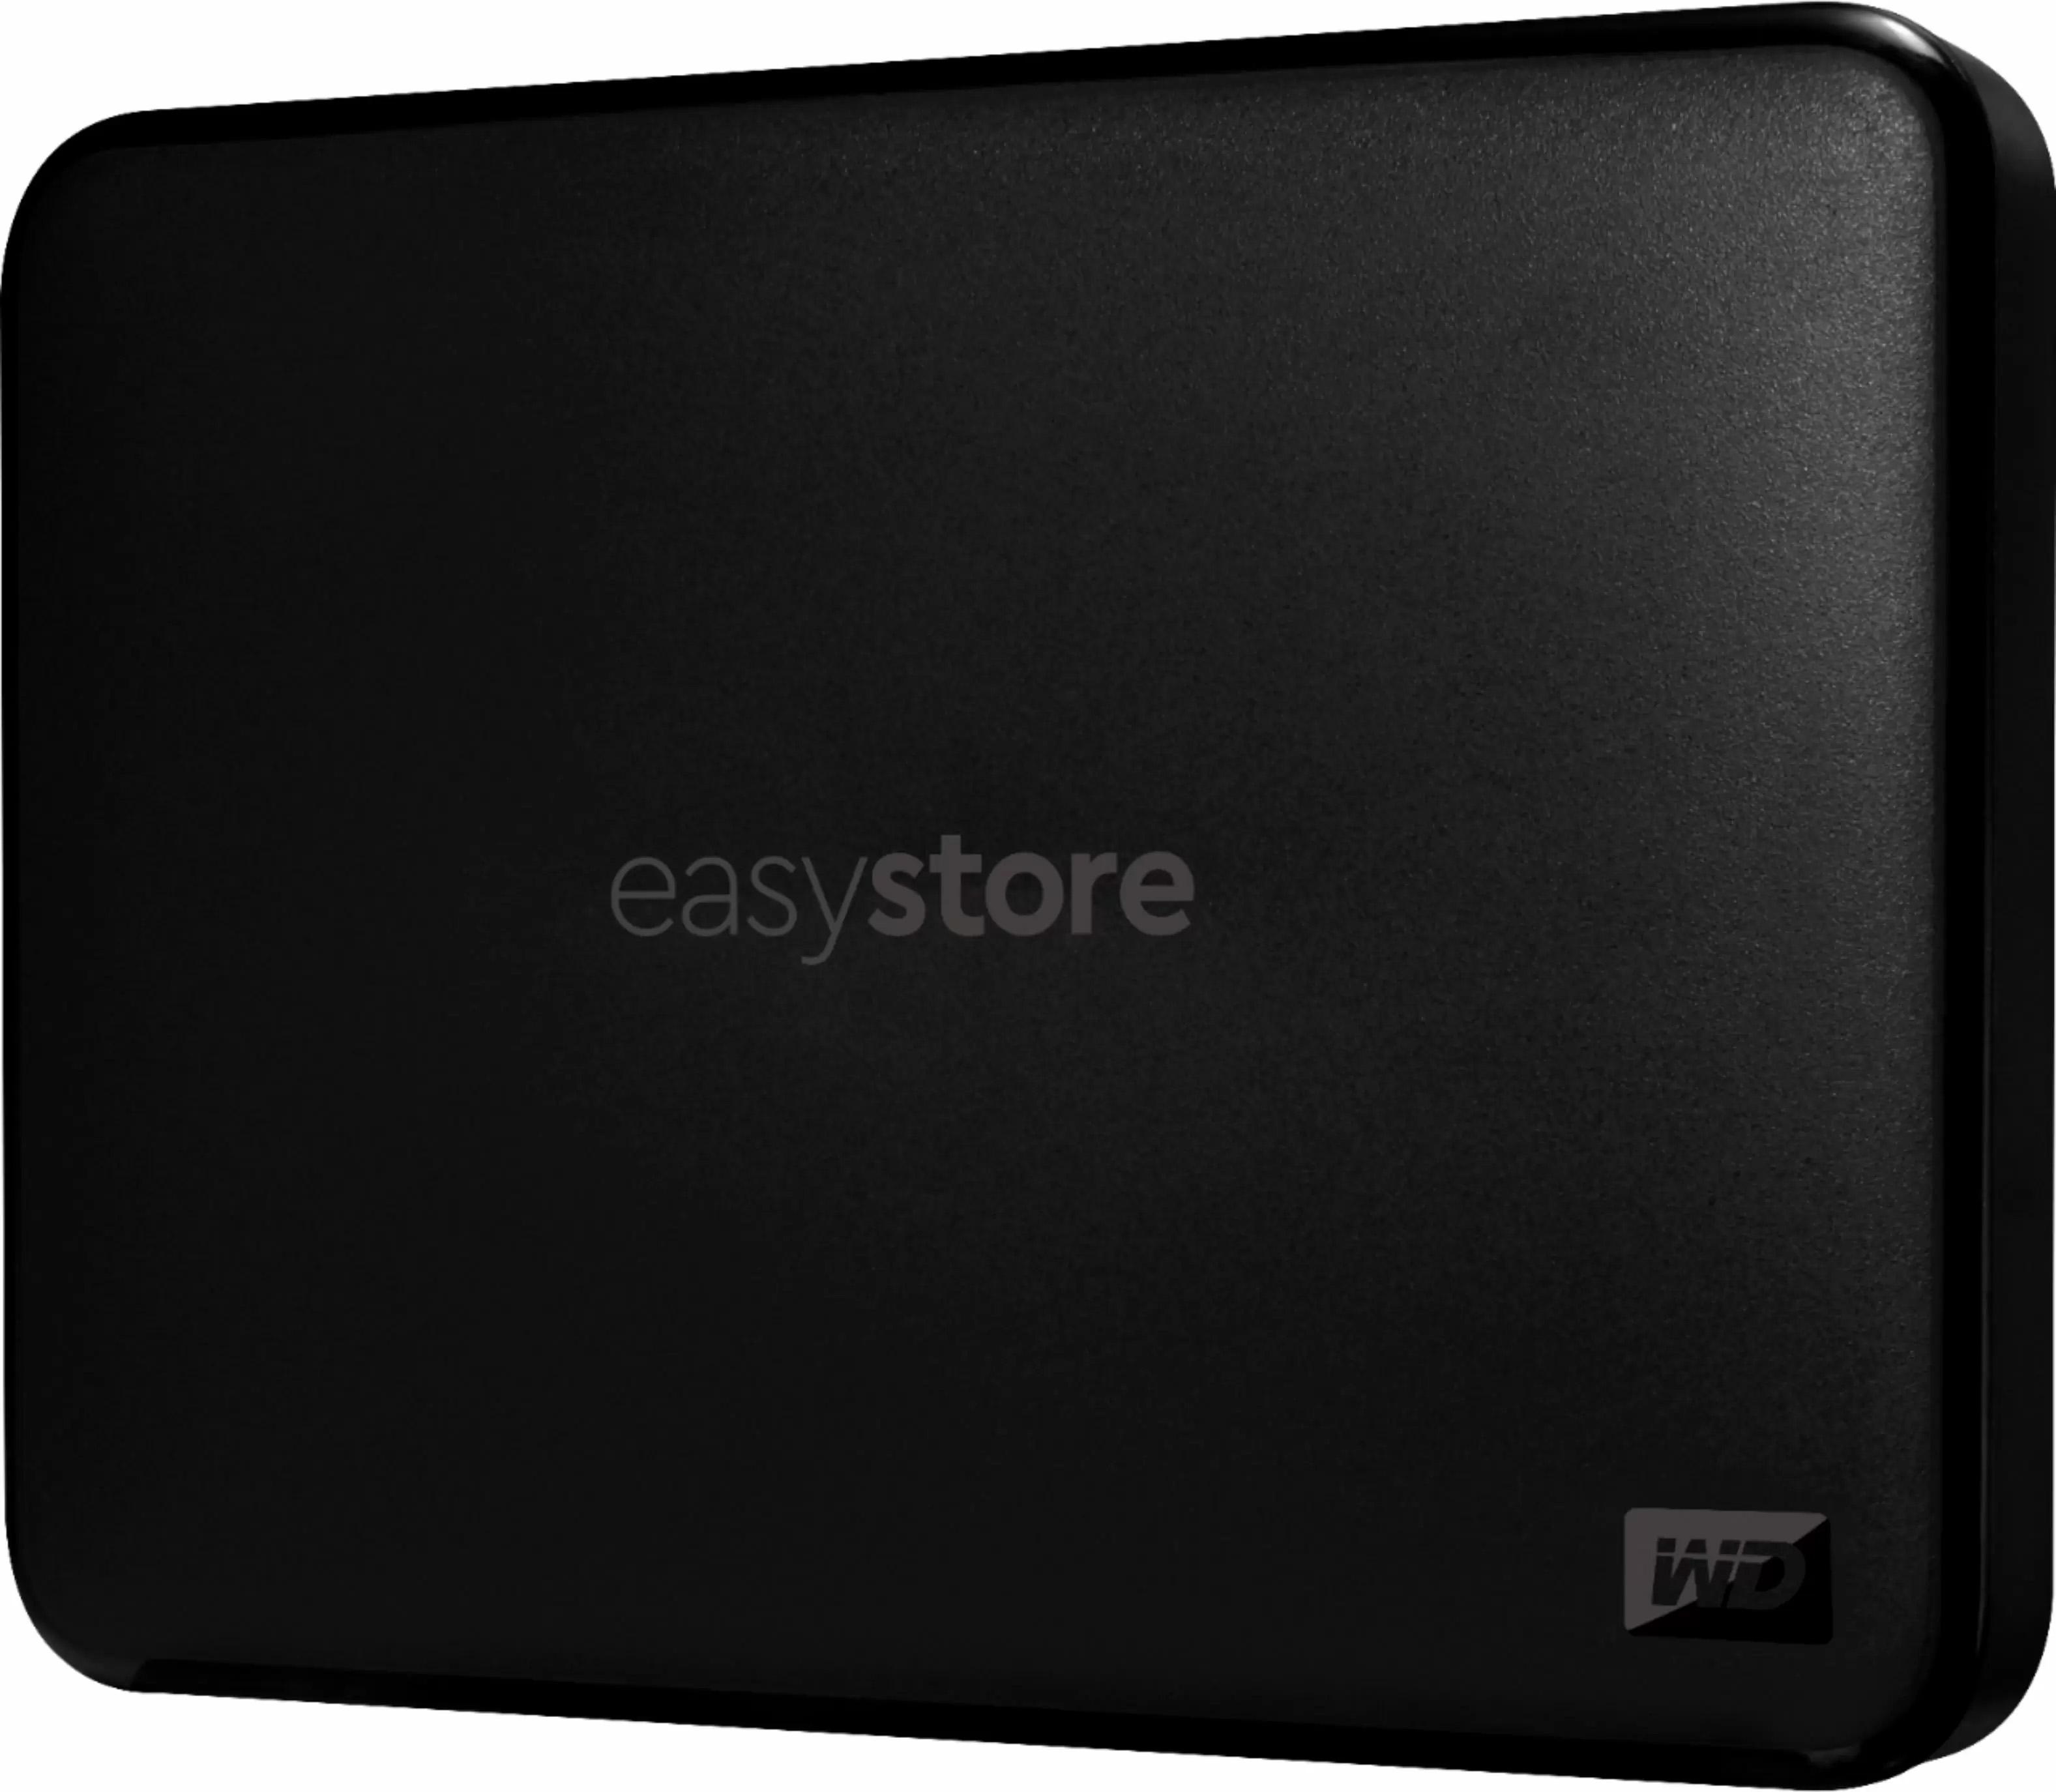 WD Easystore 2TB External USB 3.0 Portable Hard Drive for $59.99 Shipped